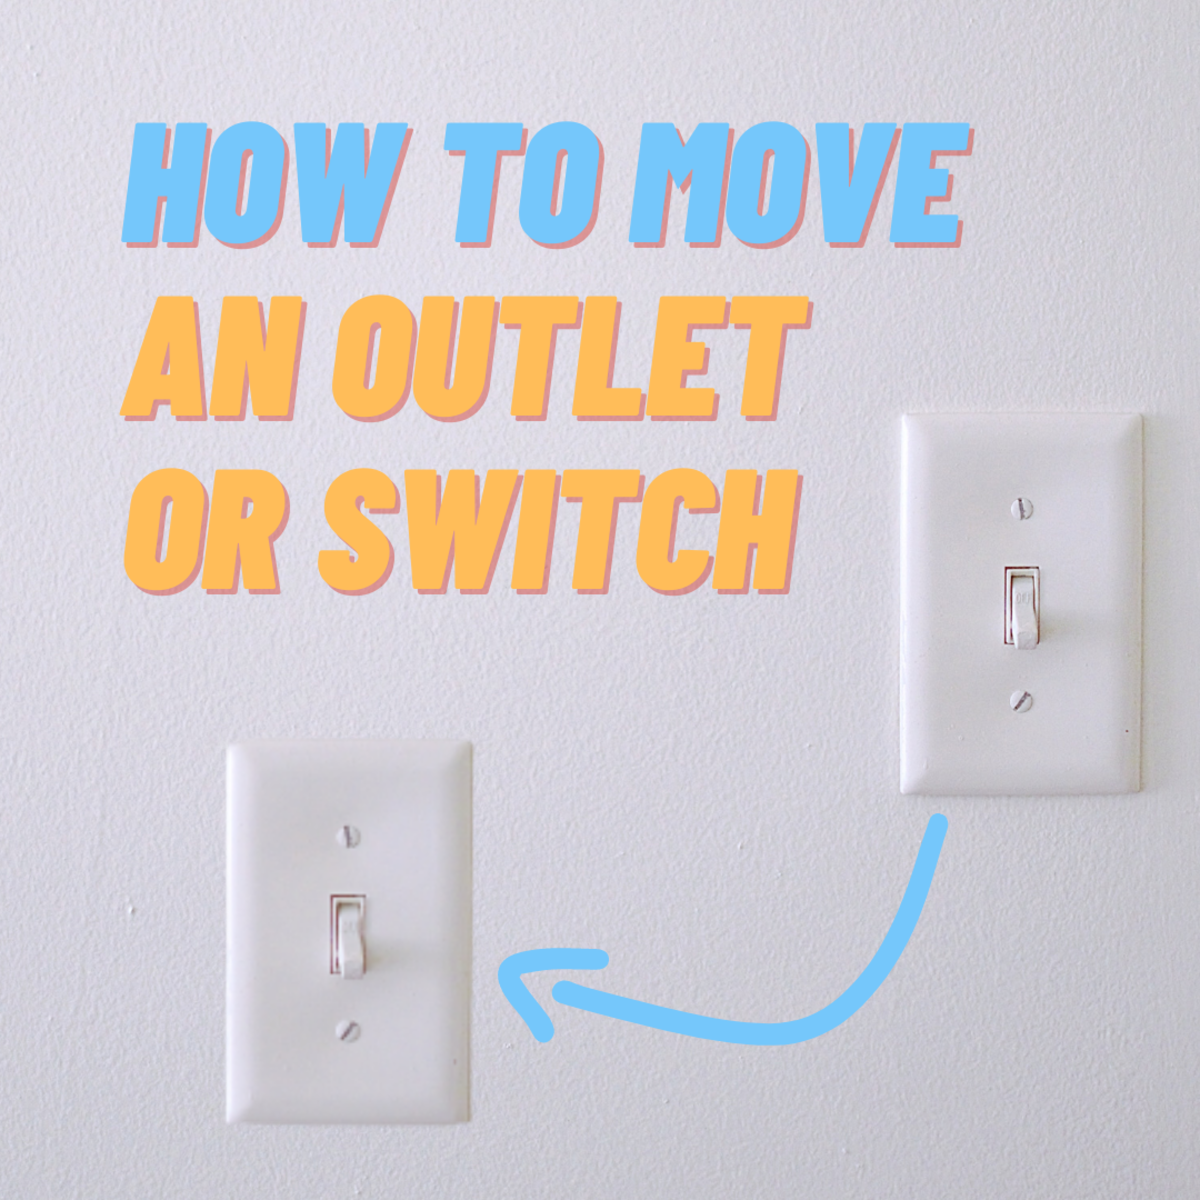 https://images.saymedia-content.com/.image/t_share/MTg4NzQyODg1NDMxMDYwMjA0/how-to-move-a-light-switch-or-electric-outlet.png